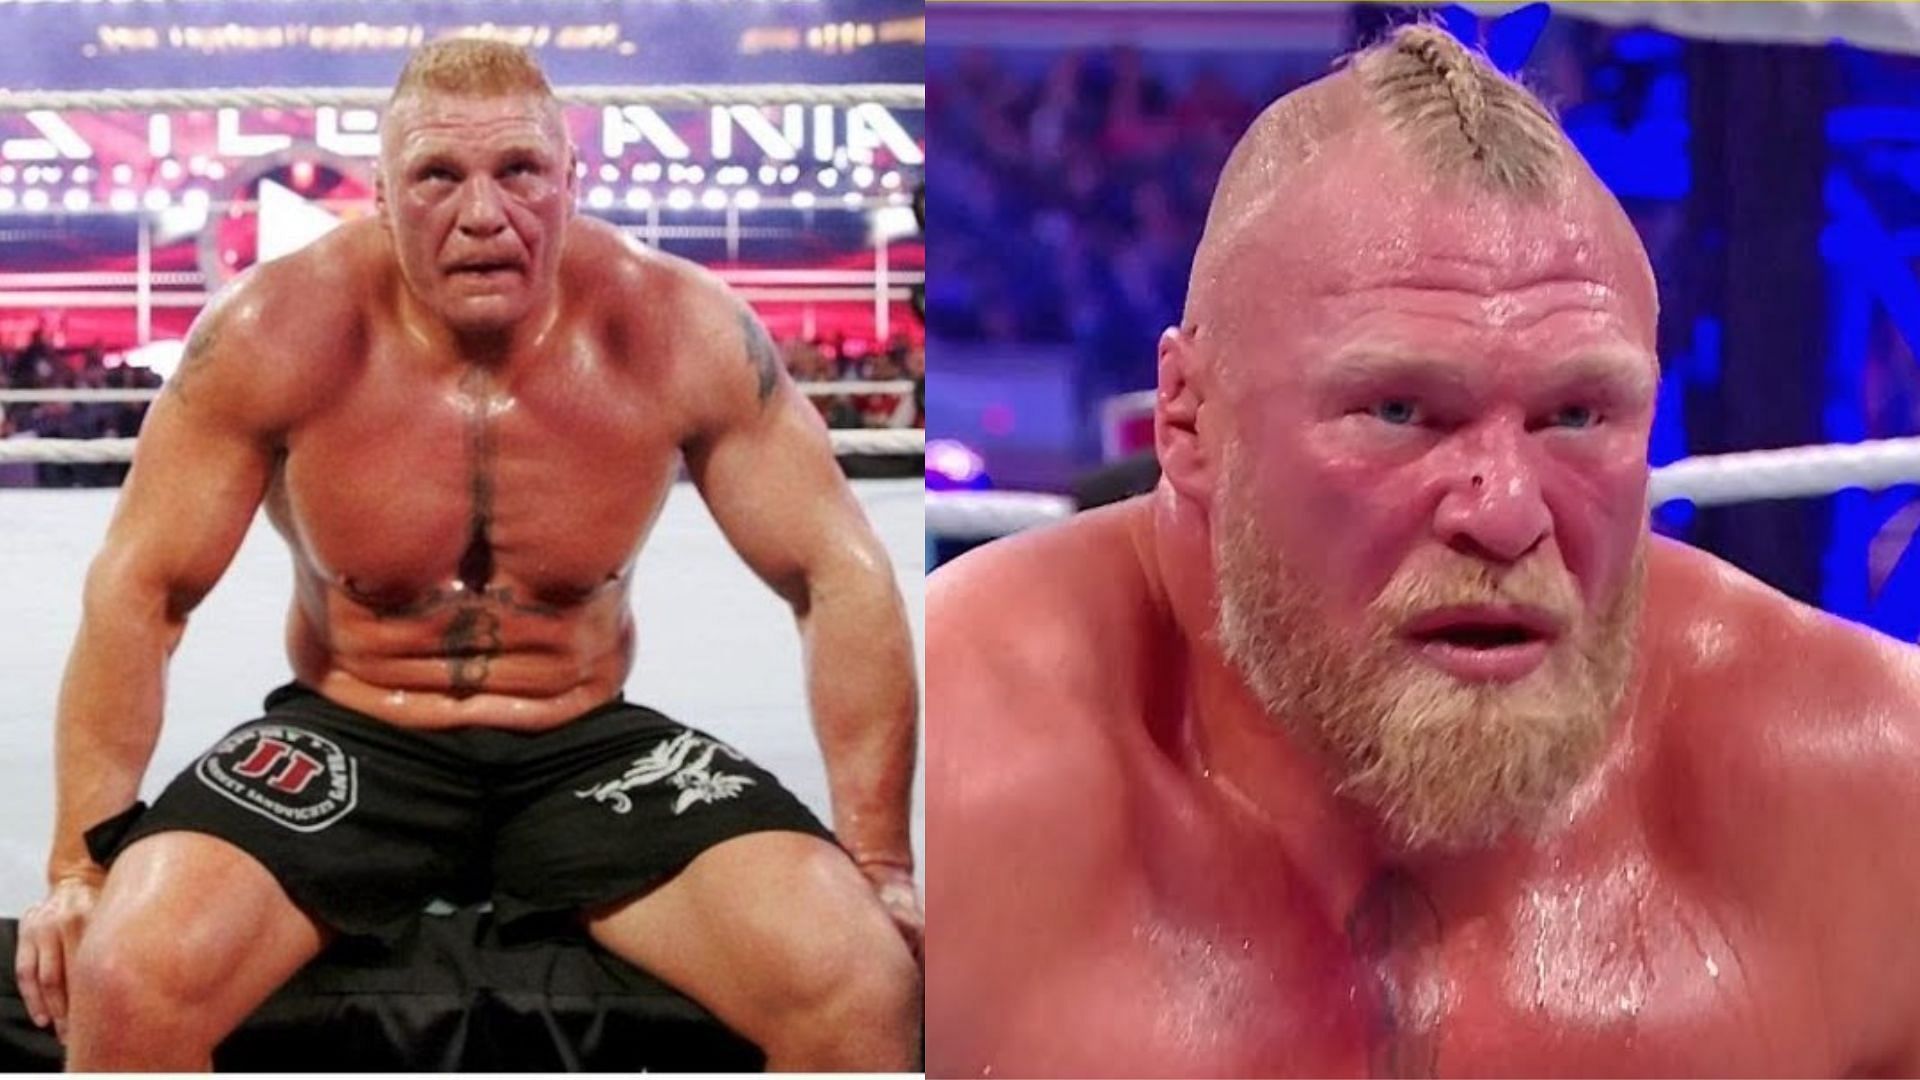 Brock Lesnar is in for quite a match at Elimination Chamber